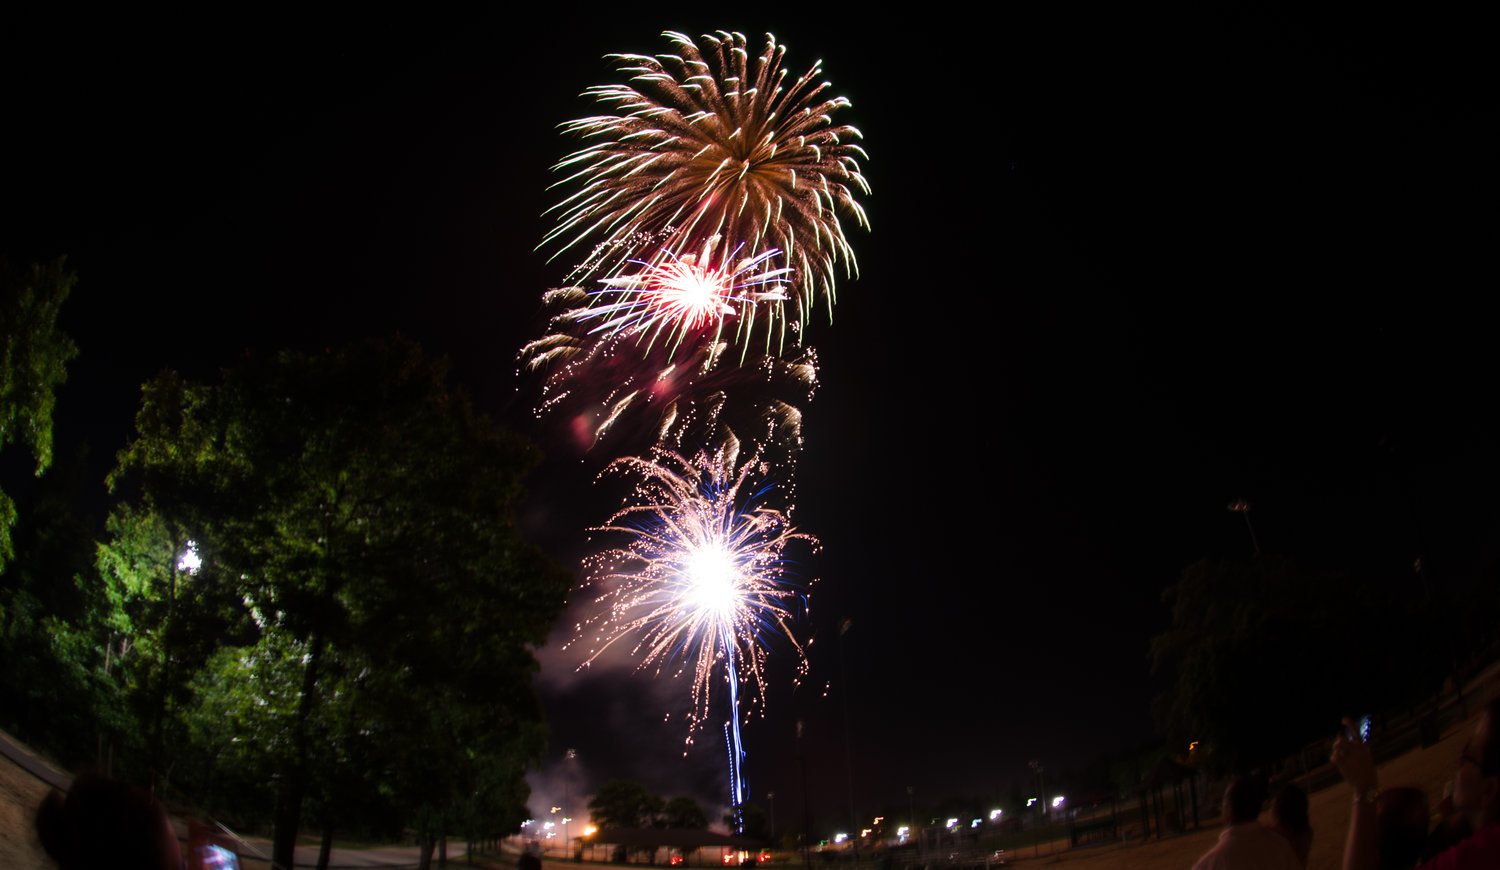 Celebrating on the 4th? Follow these safety tips